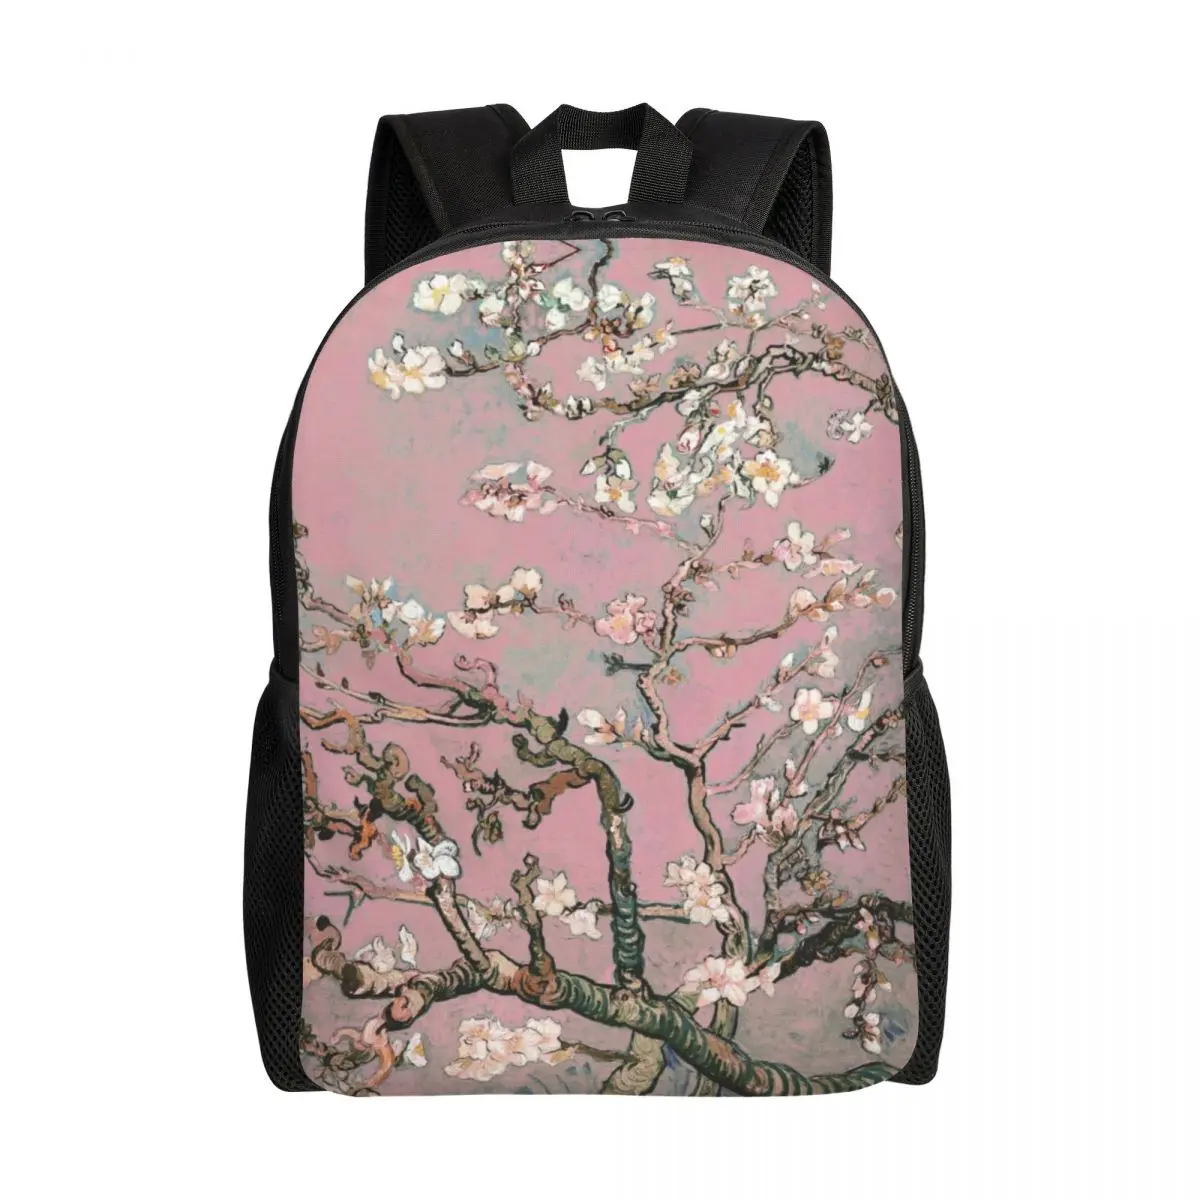 

Almond Blossoms By Vincent Van Gogh Travel Backpack School Laptop Bookbag Blossoming Almond Tree College Student Daypack Bags